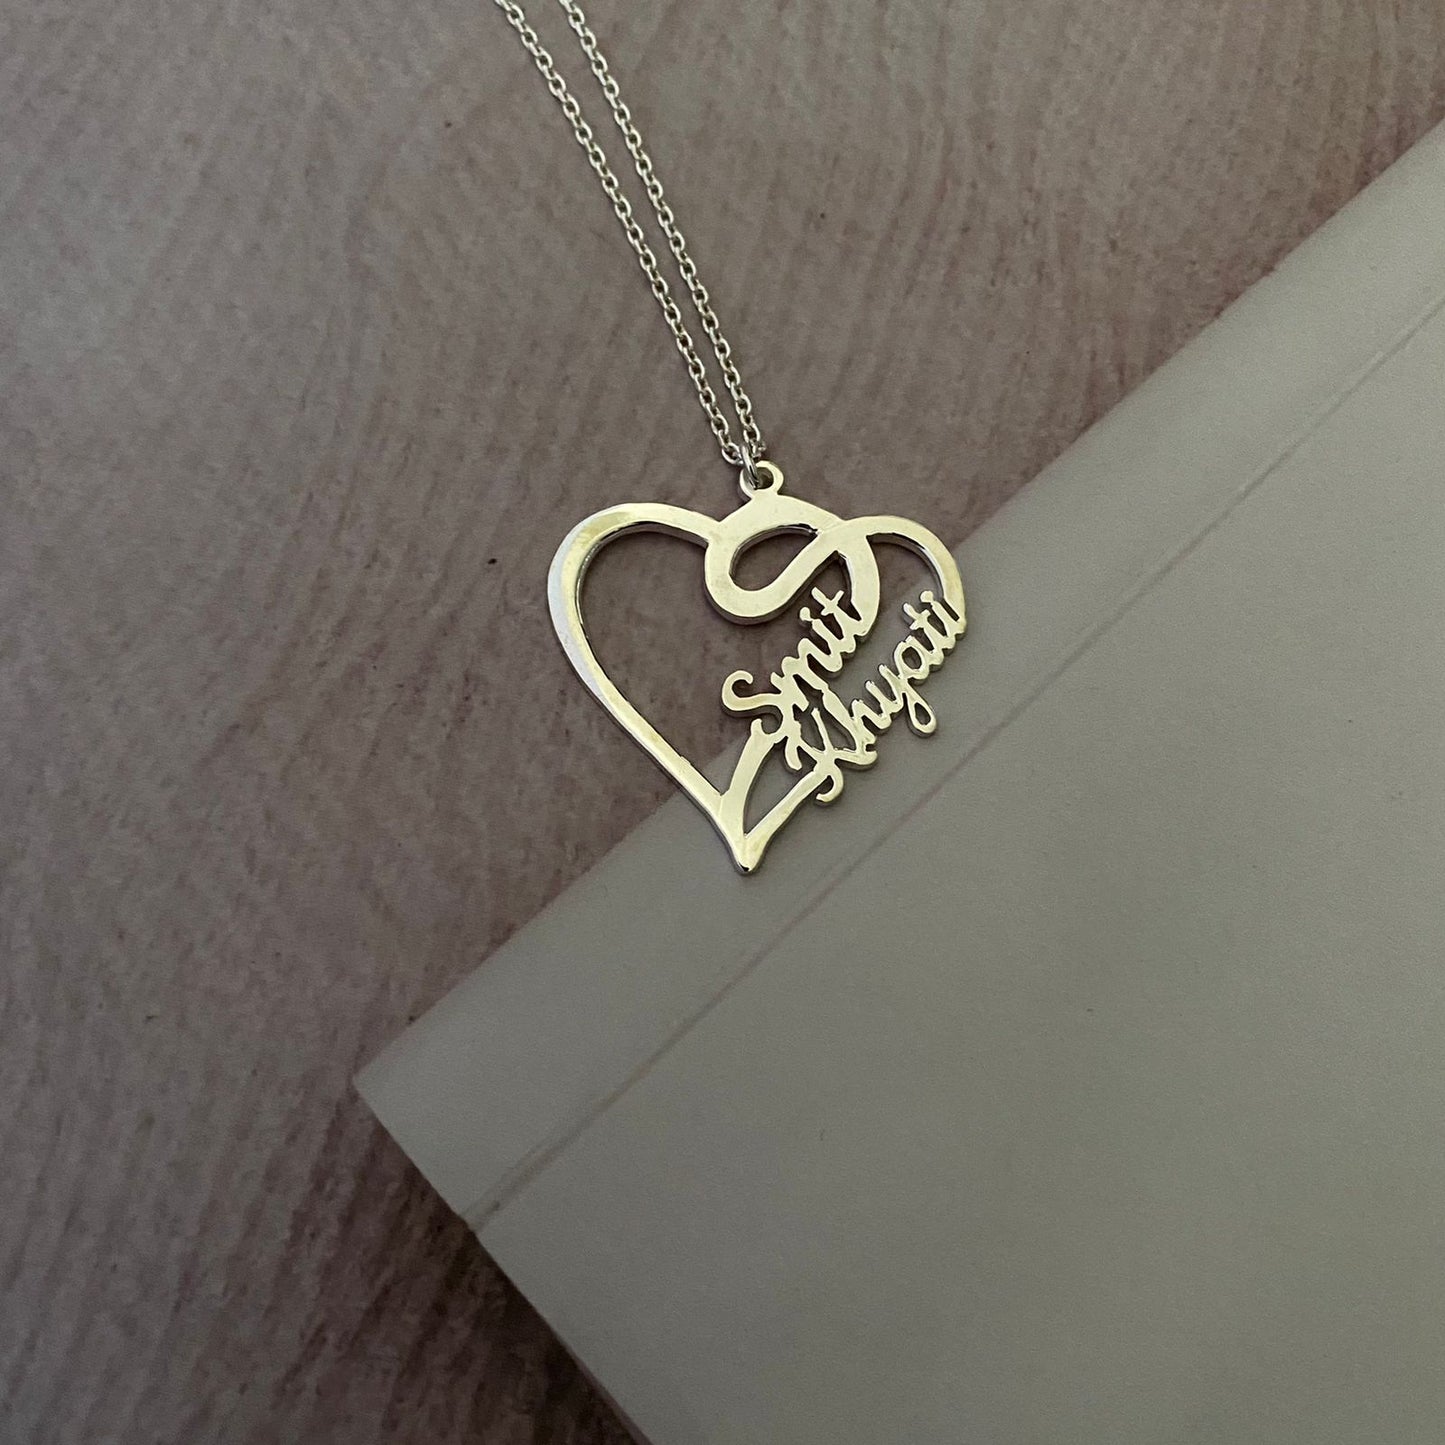 Personalised Overlapping Heart Couple Name Necklace in 92.5 Sterling Silver